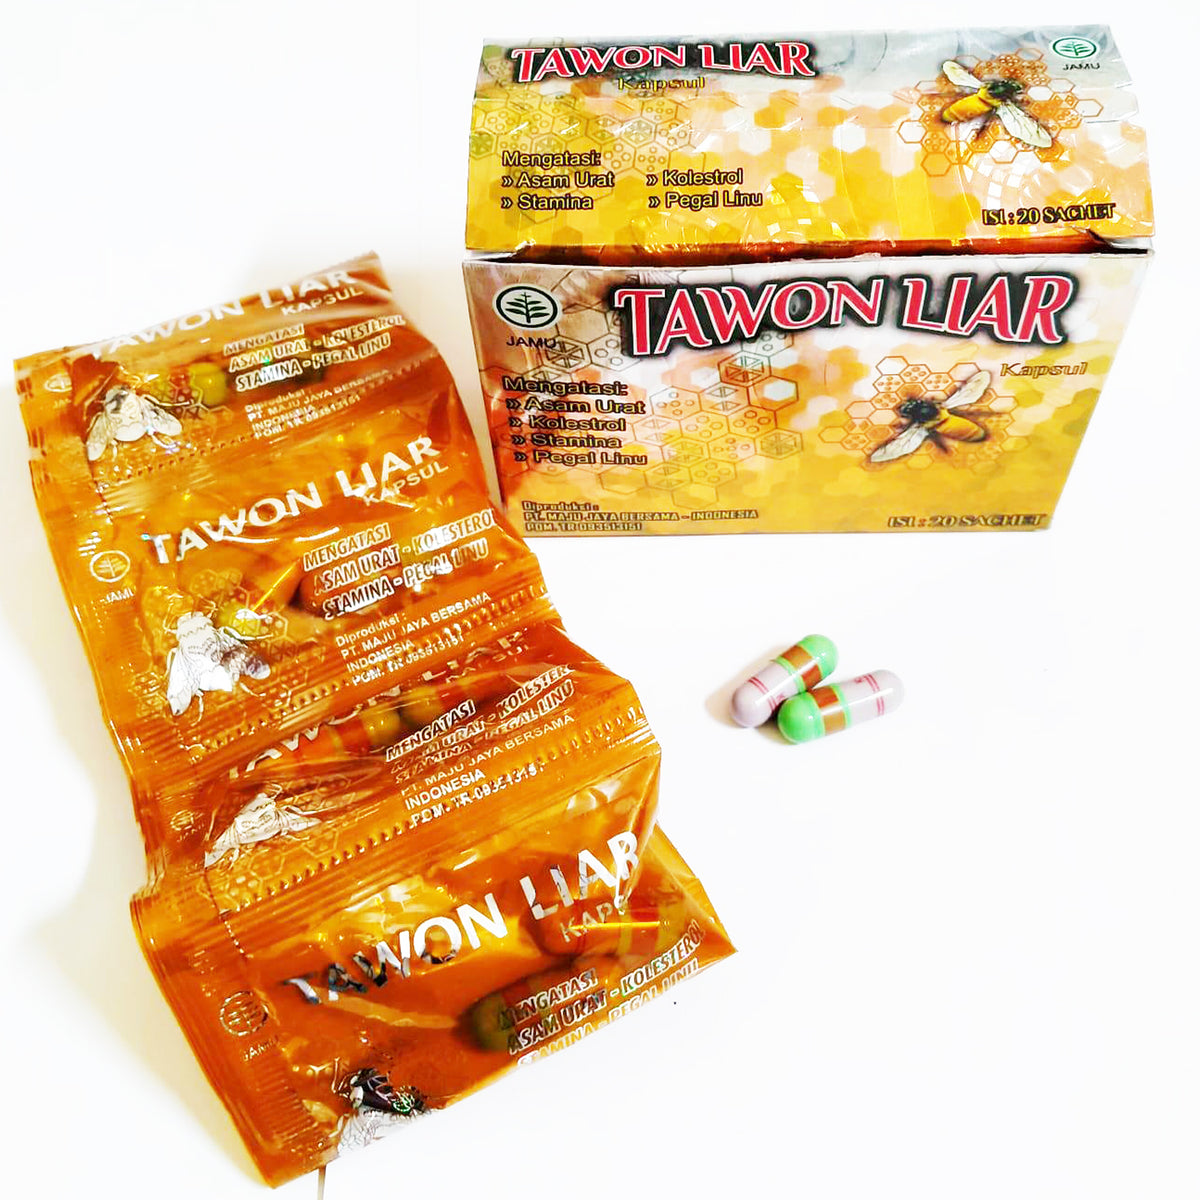 10 box Tawon Liar Bee For The Treatment Of Joins New Packaging